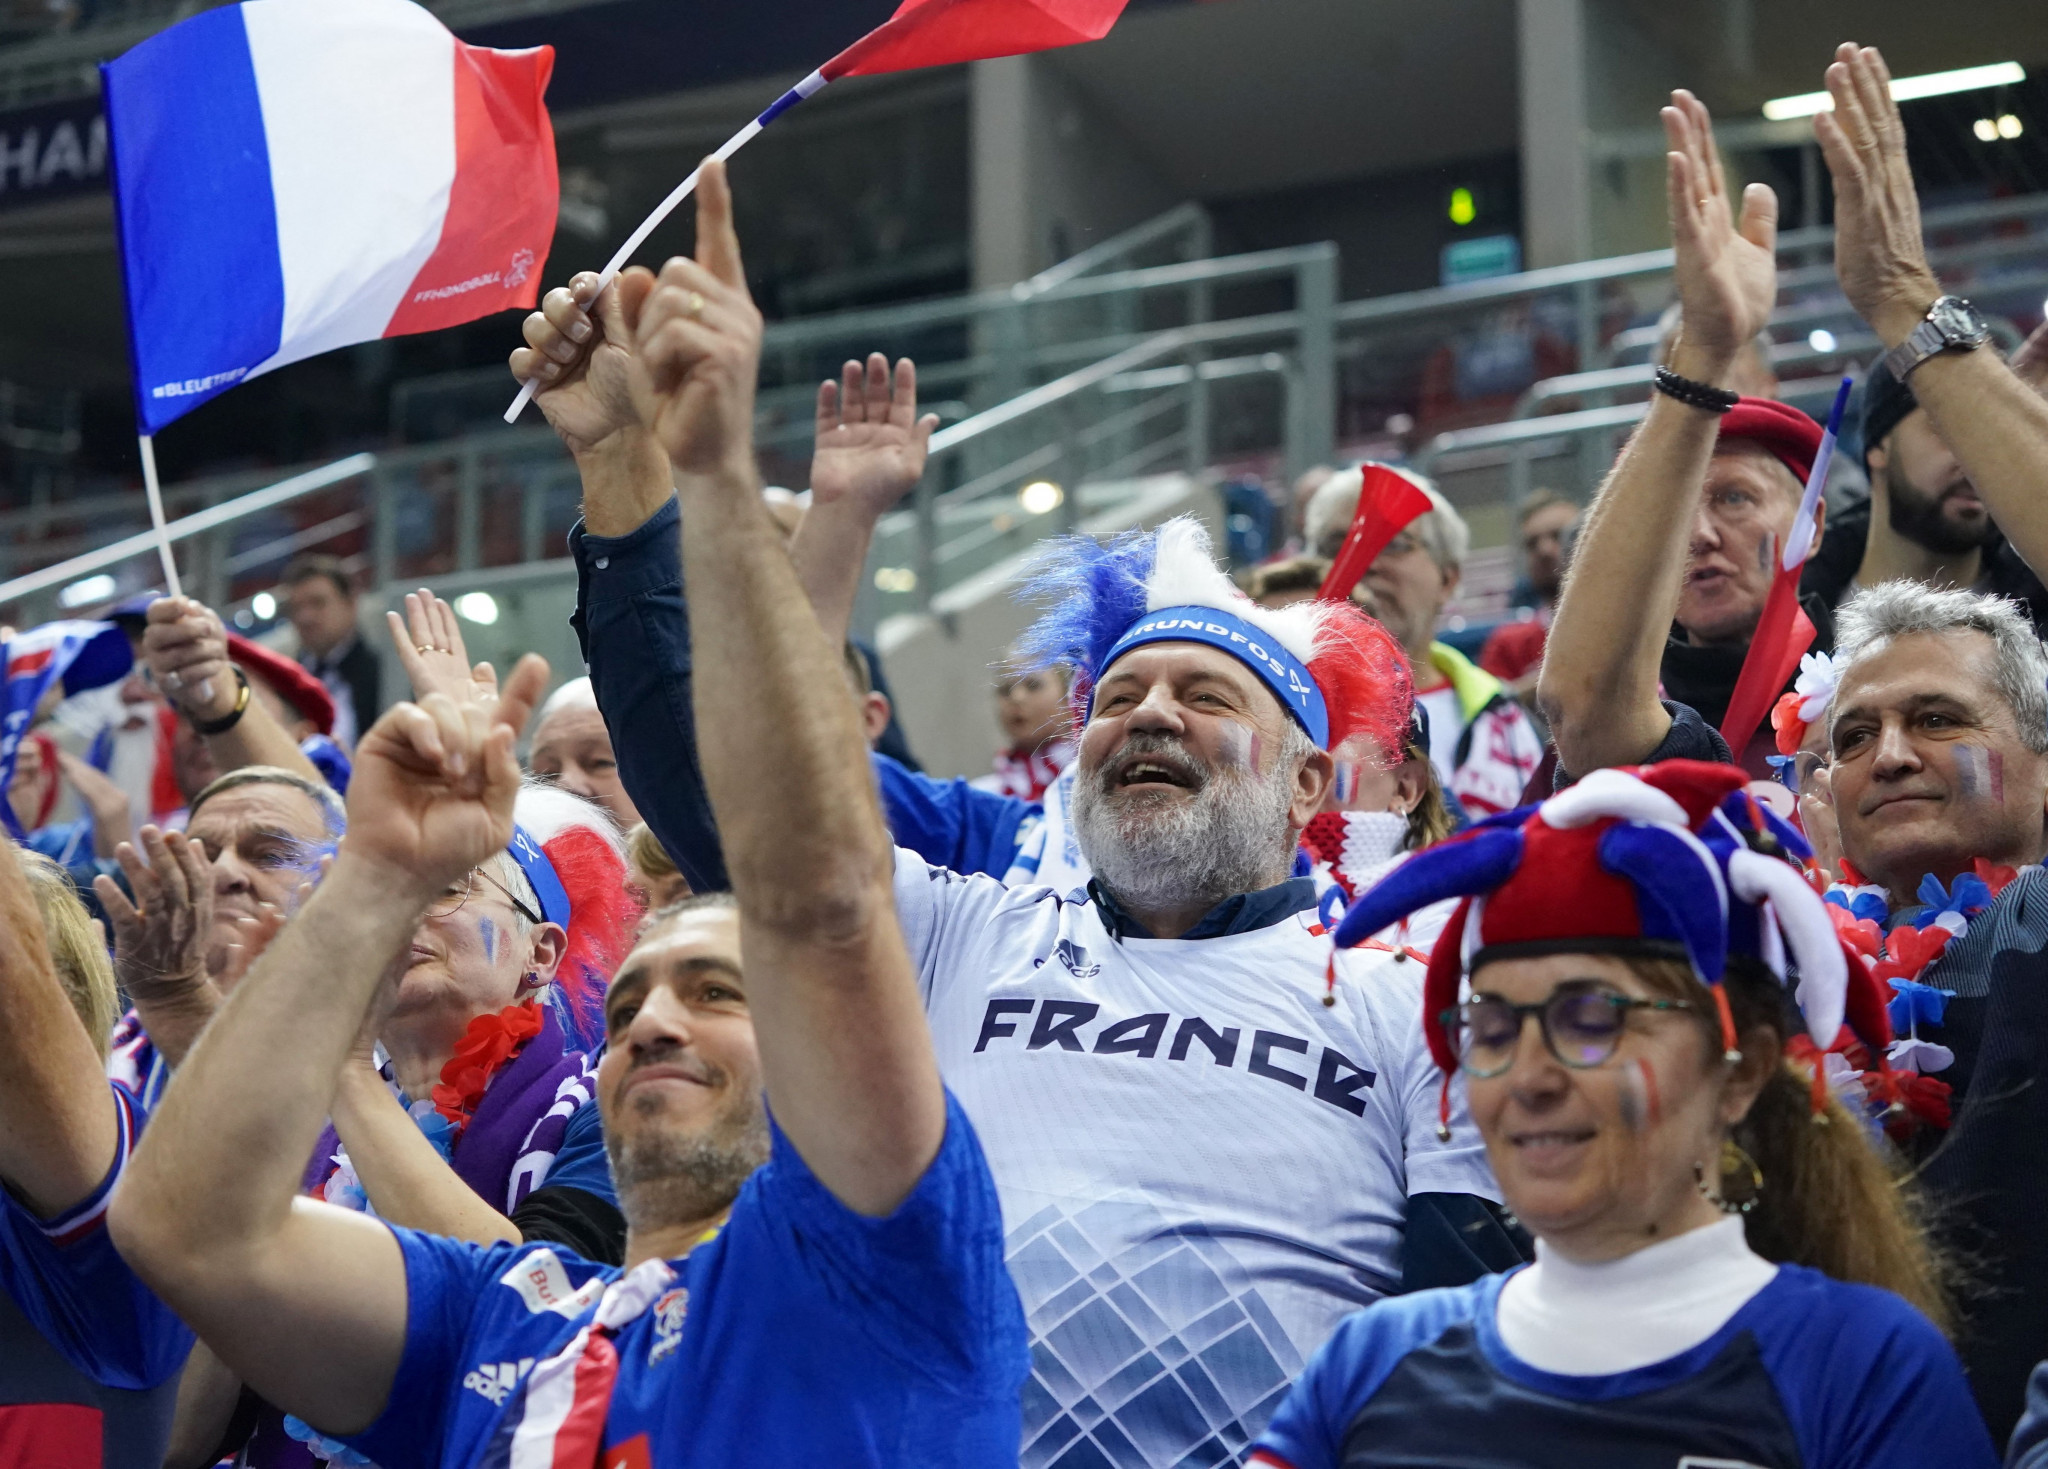 France fans celebrate after their team took a big step in their campaign to win the IHF Men's World Championship for the first time since 2017 ©Getty Images